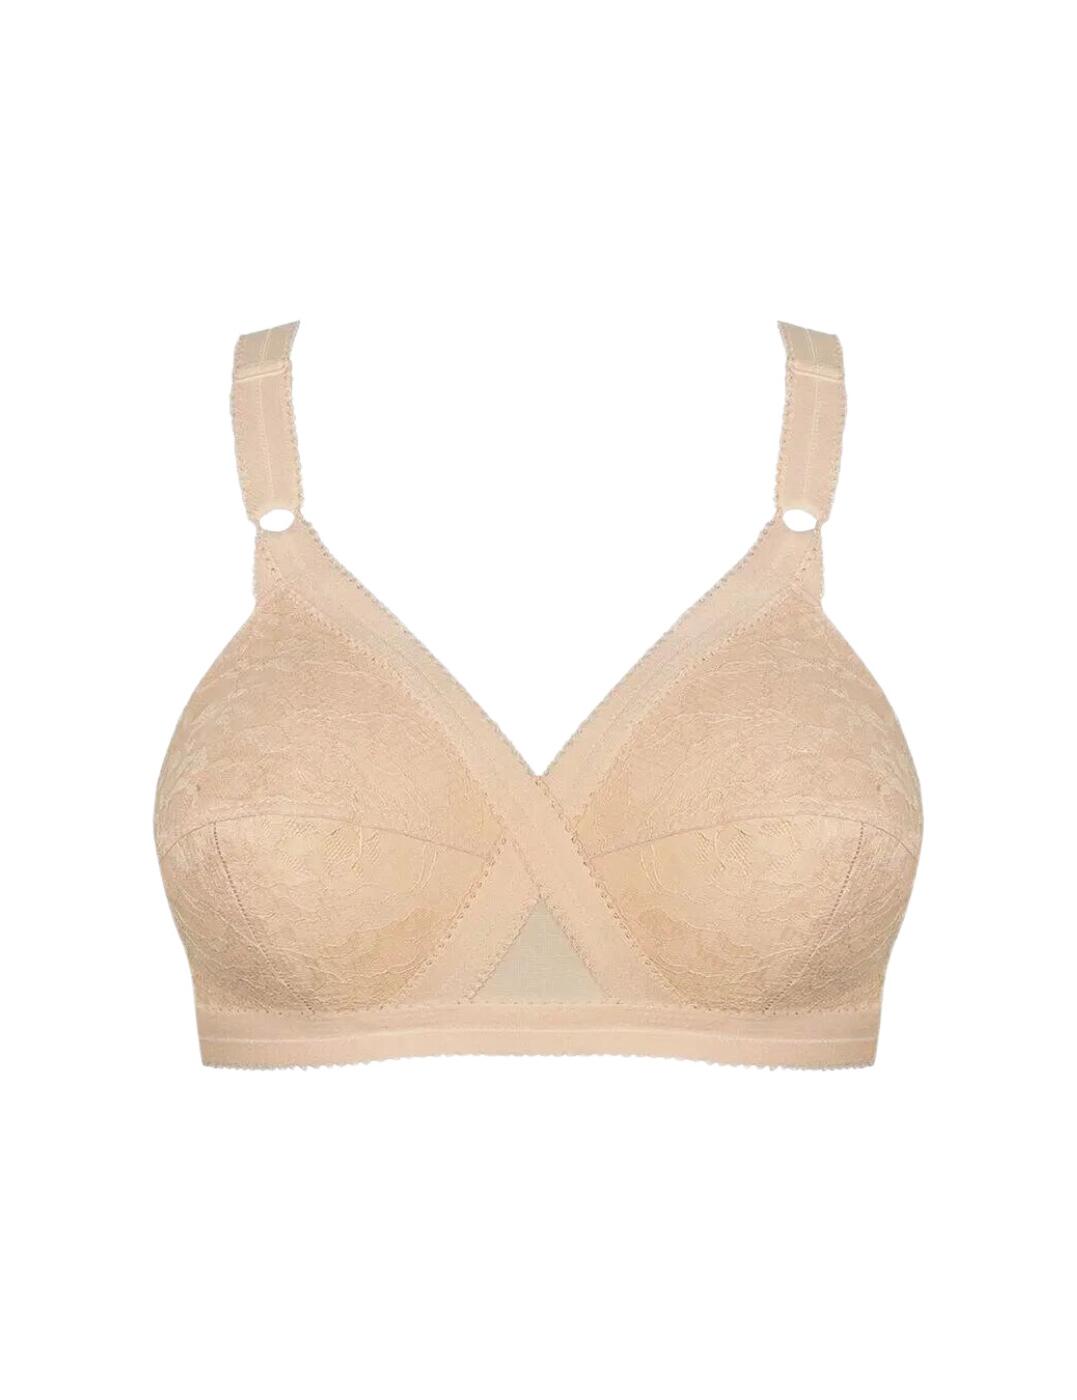 PLAYTEX CROSS YOUR Heart Bra Non-Wired Full Coverage Wirefree Bras